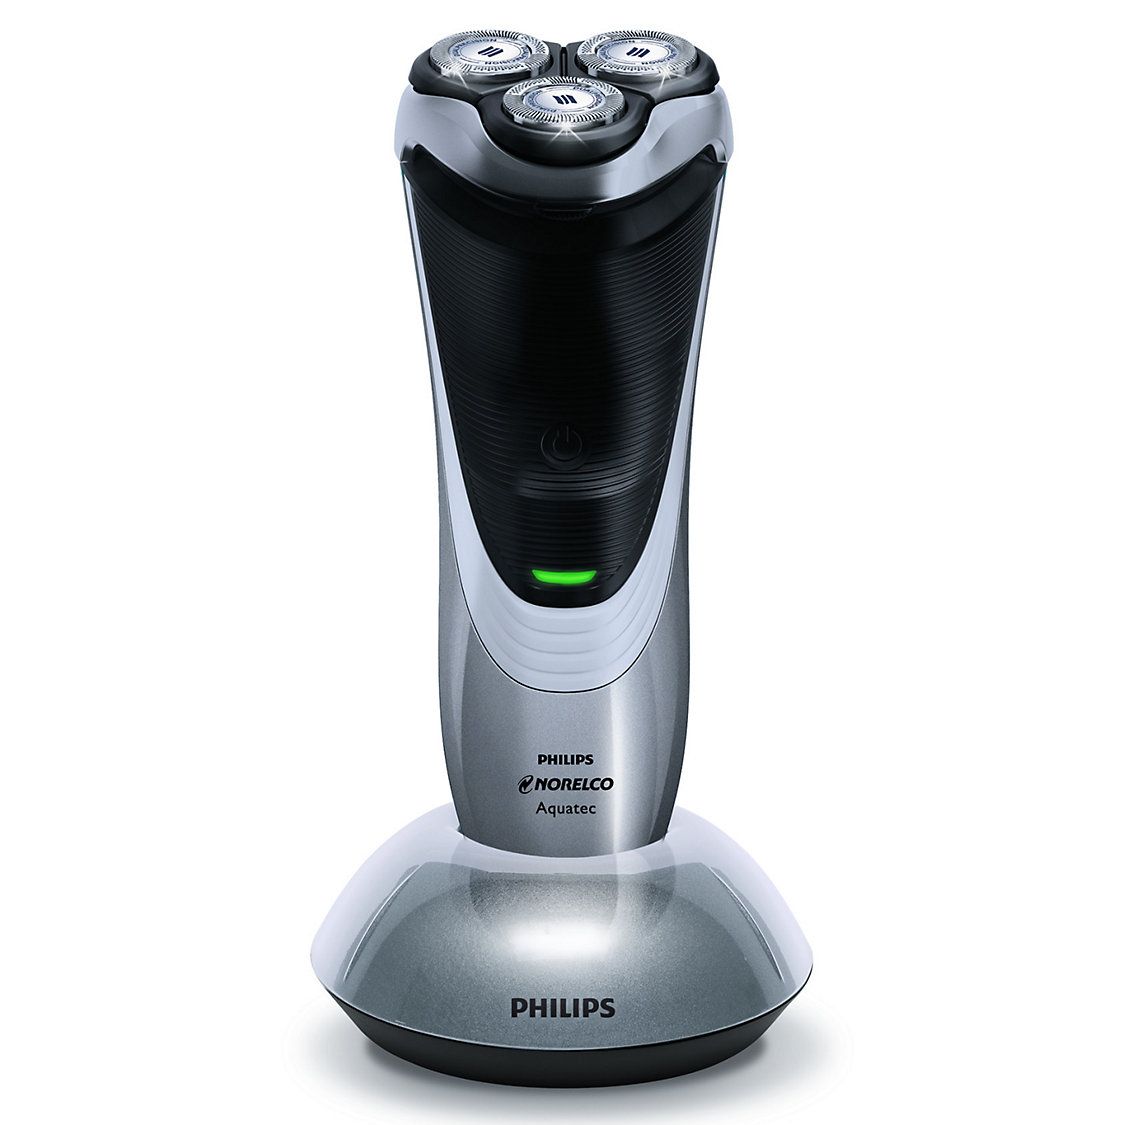 Philips Norelco Electric Shaver 4400 Pop Up Trimmer | Kohl's